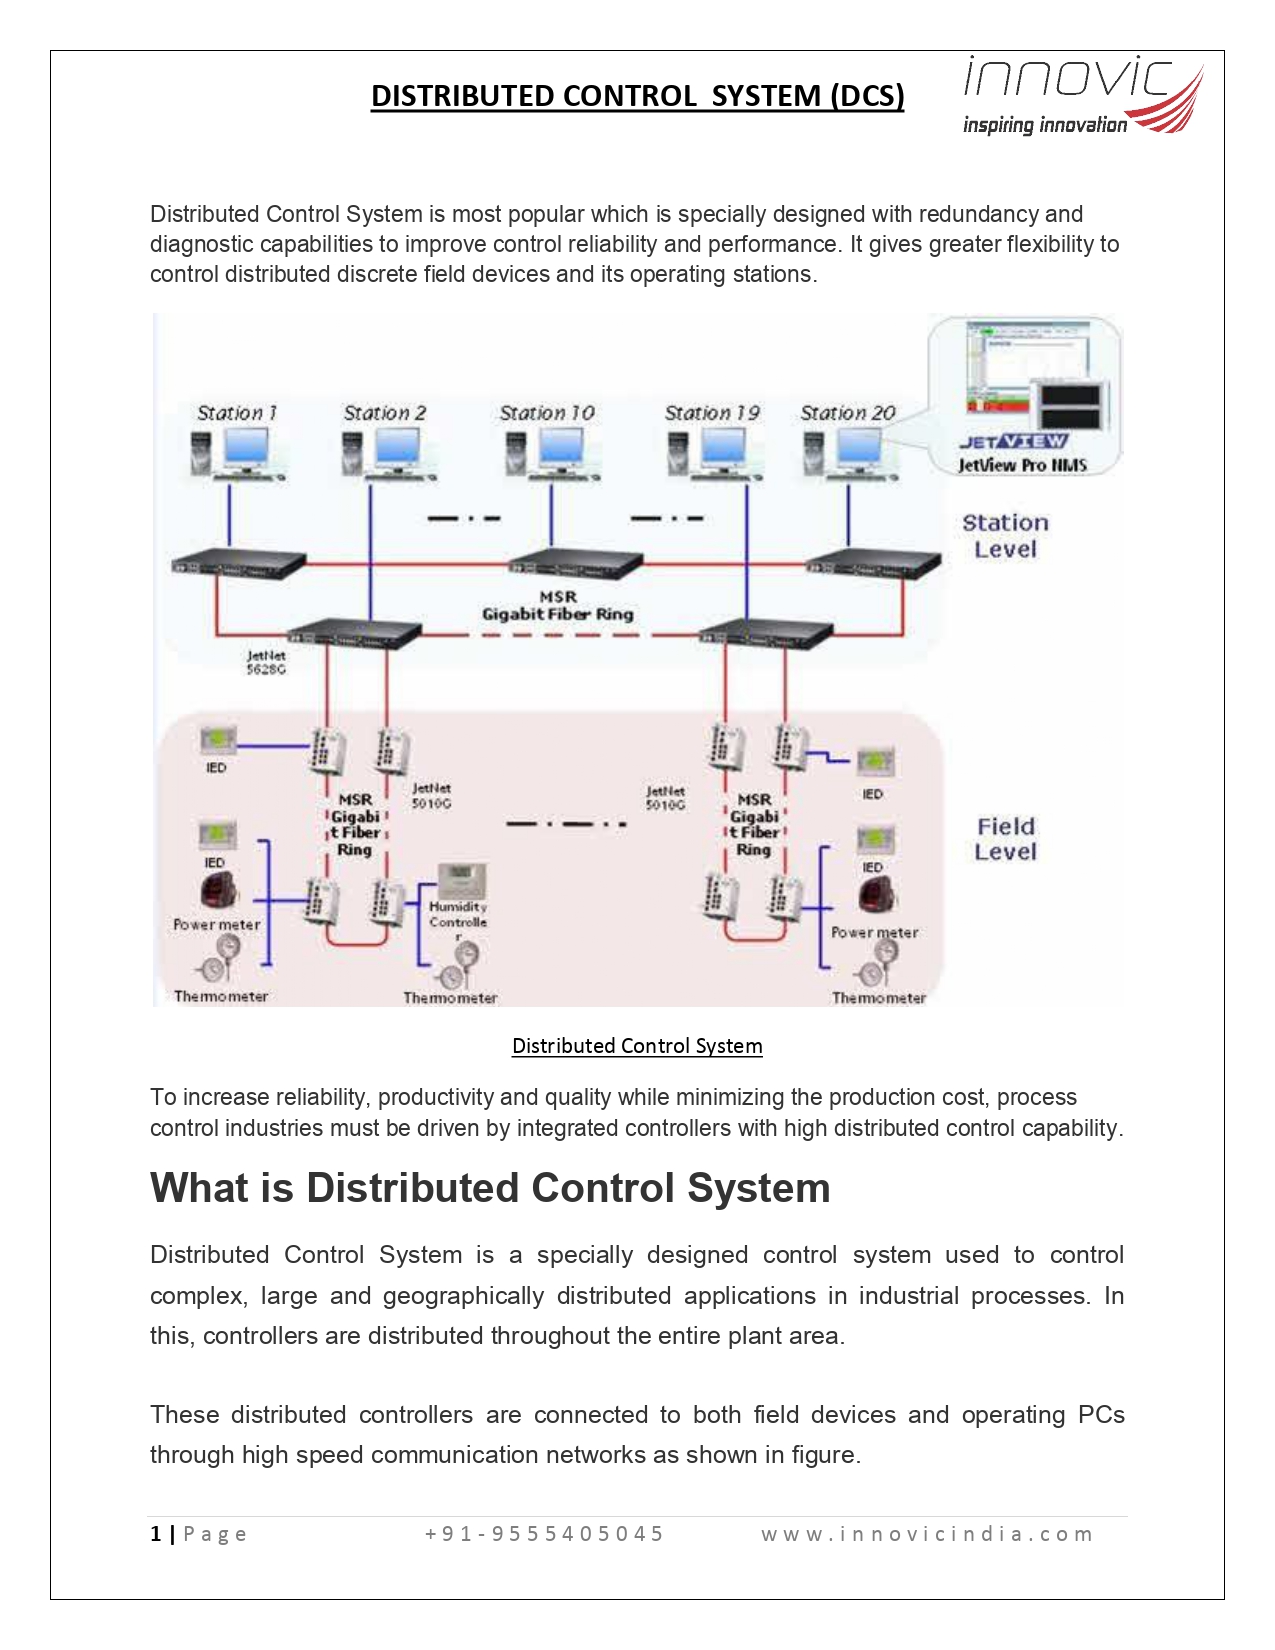 Distributed Control System (DCS)